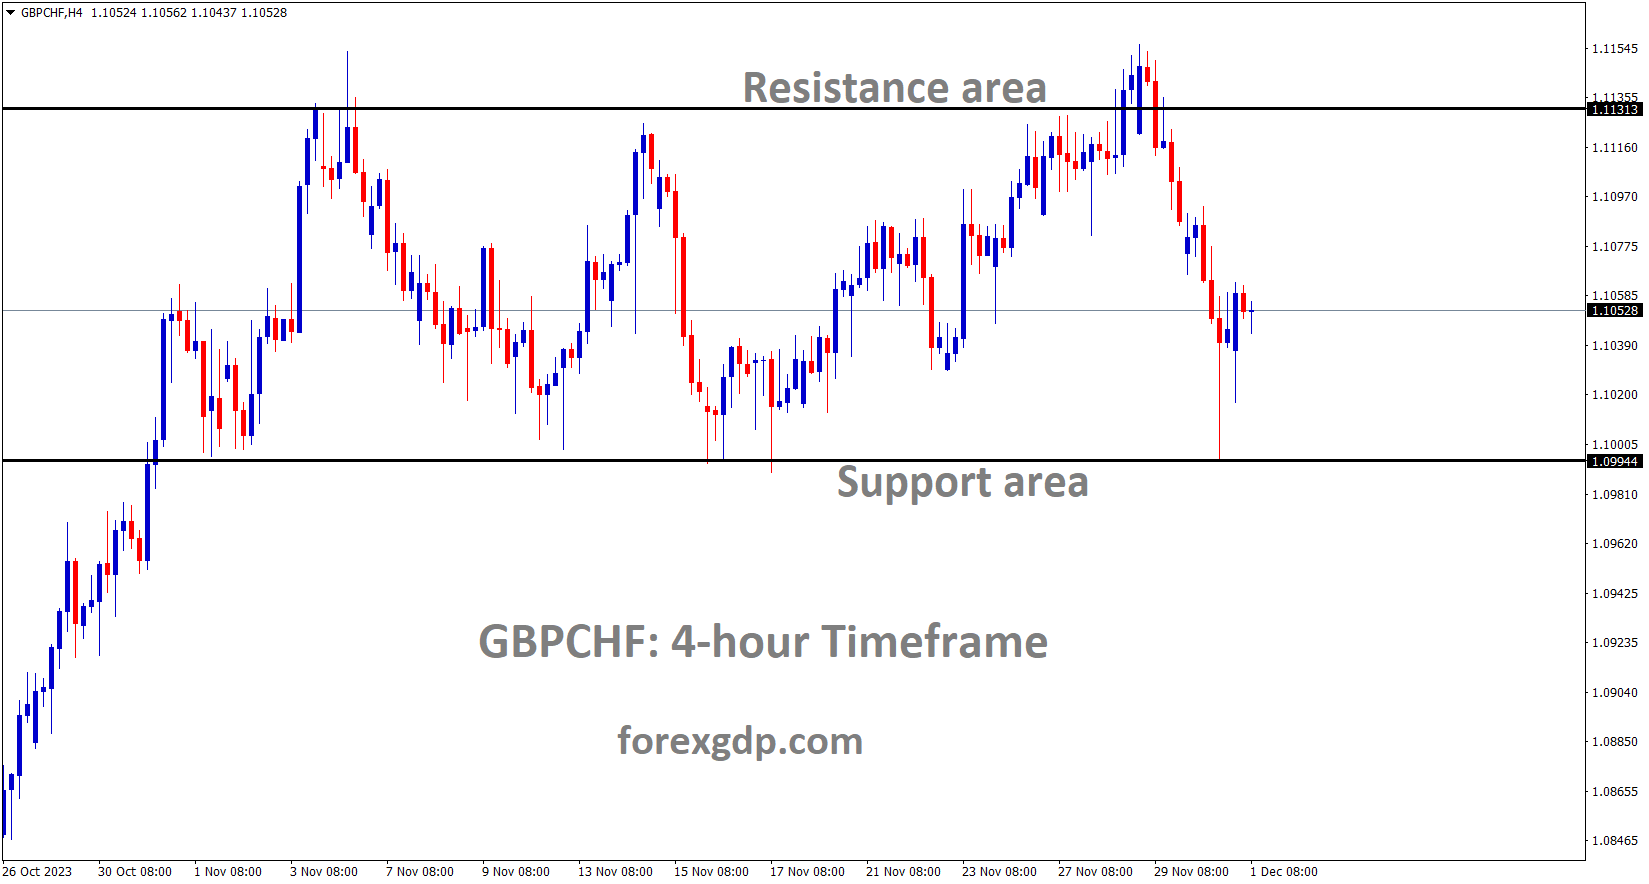 GBPCHF is moving in the Box pattern and the market has rebounded from the support area of the pattern